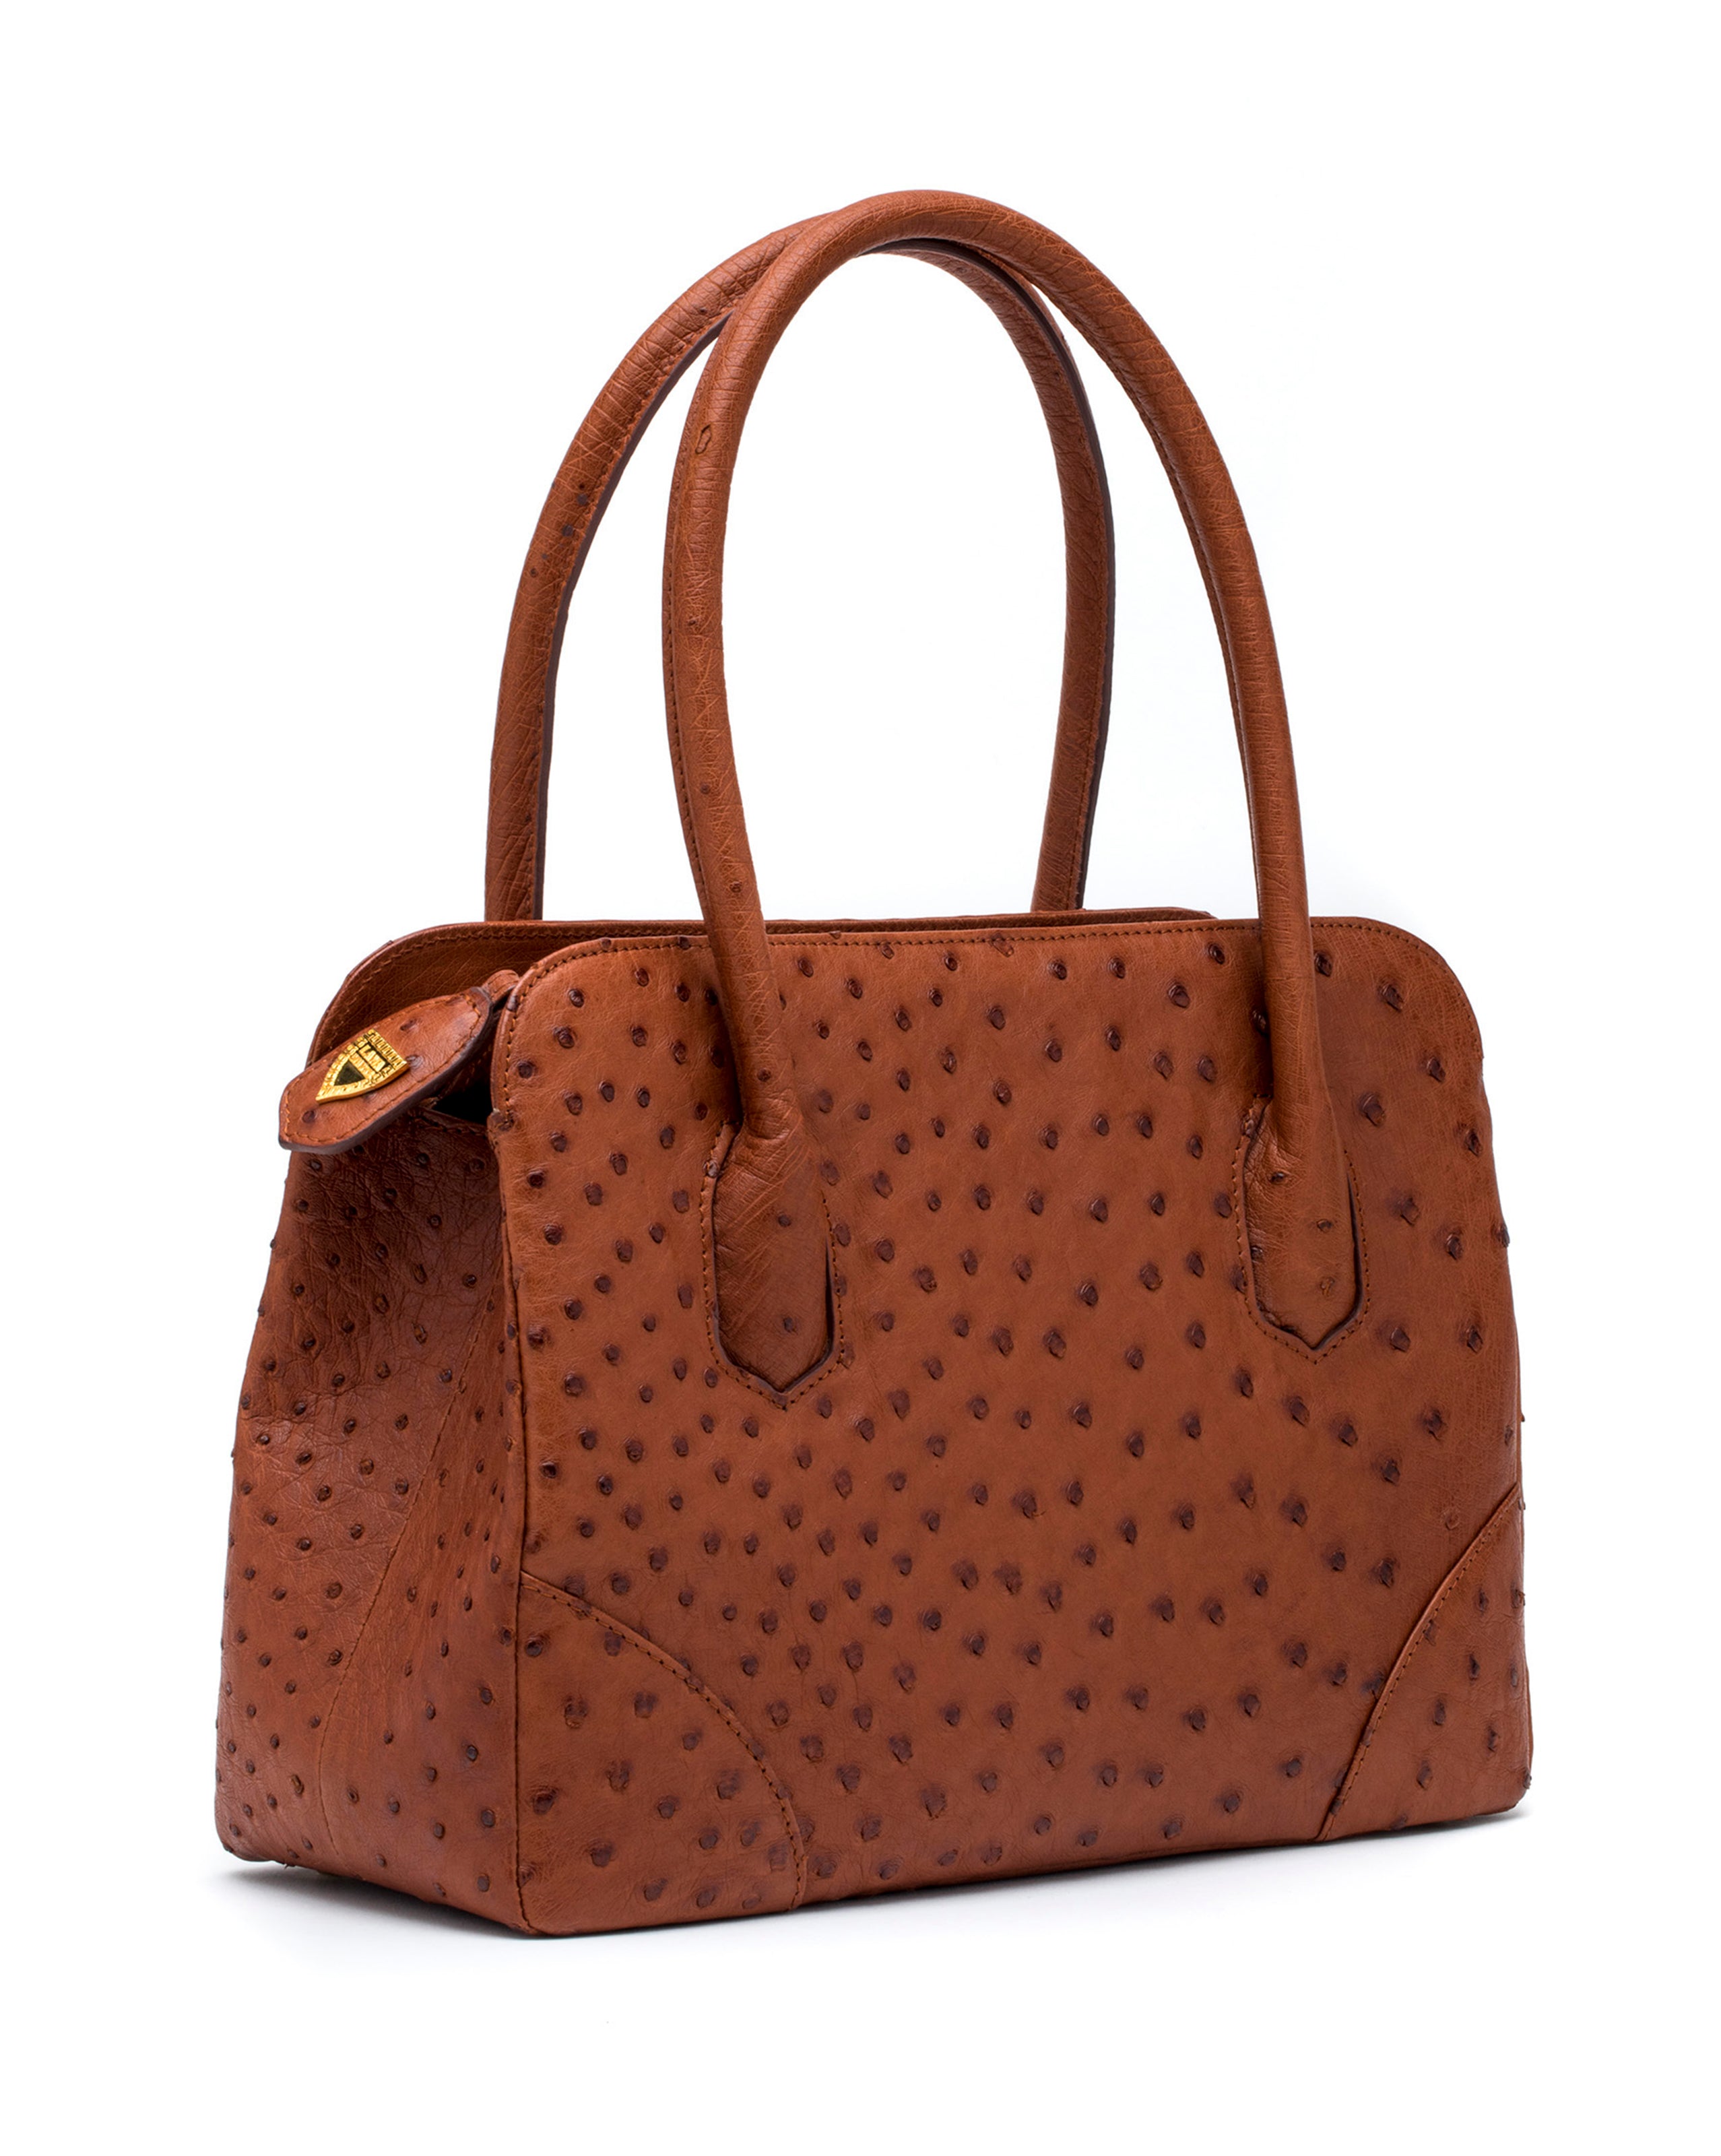 Baby Jet Tote in Almond